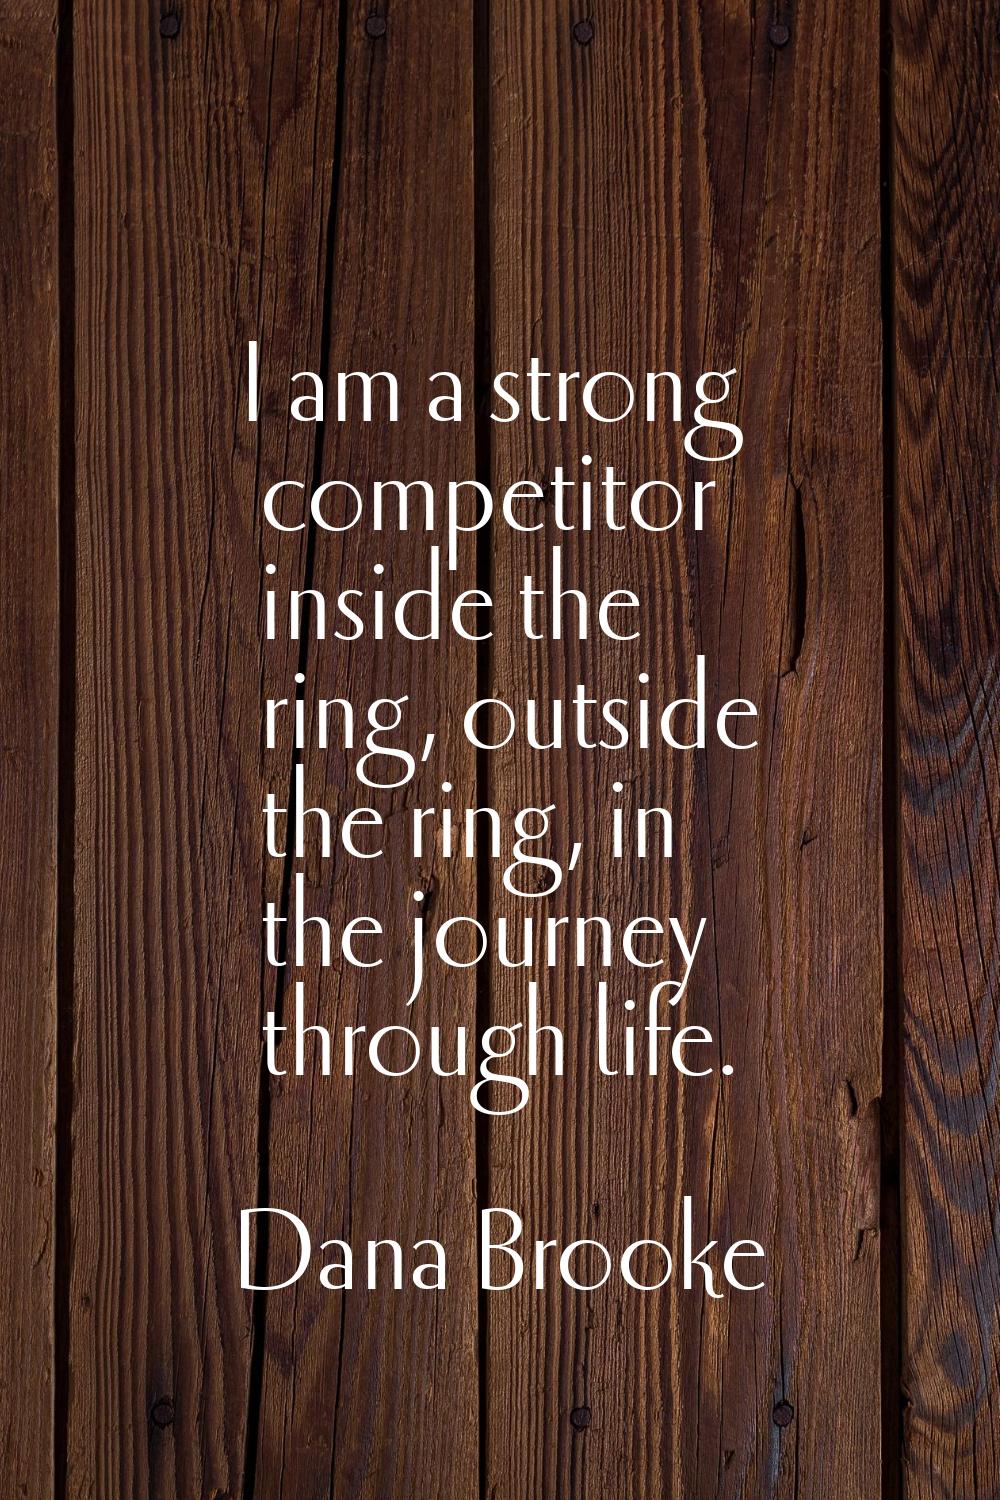 I am a strong competitor inside the ring, outside the ring, in the journey through life.